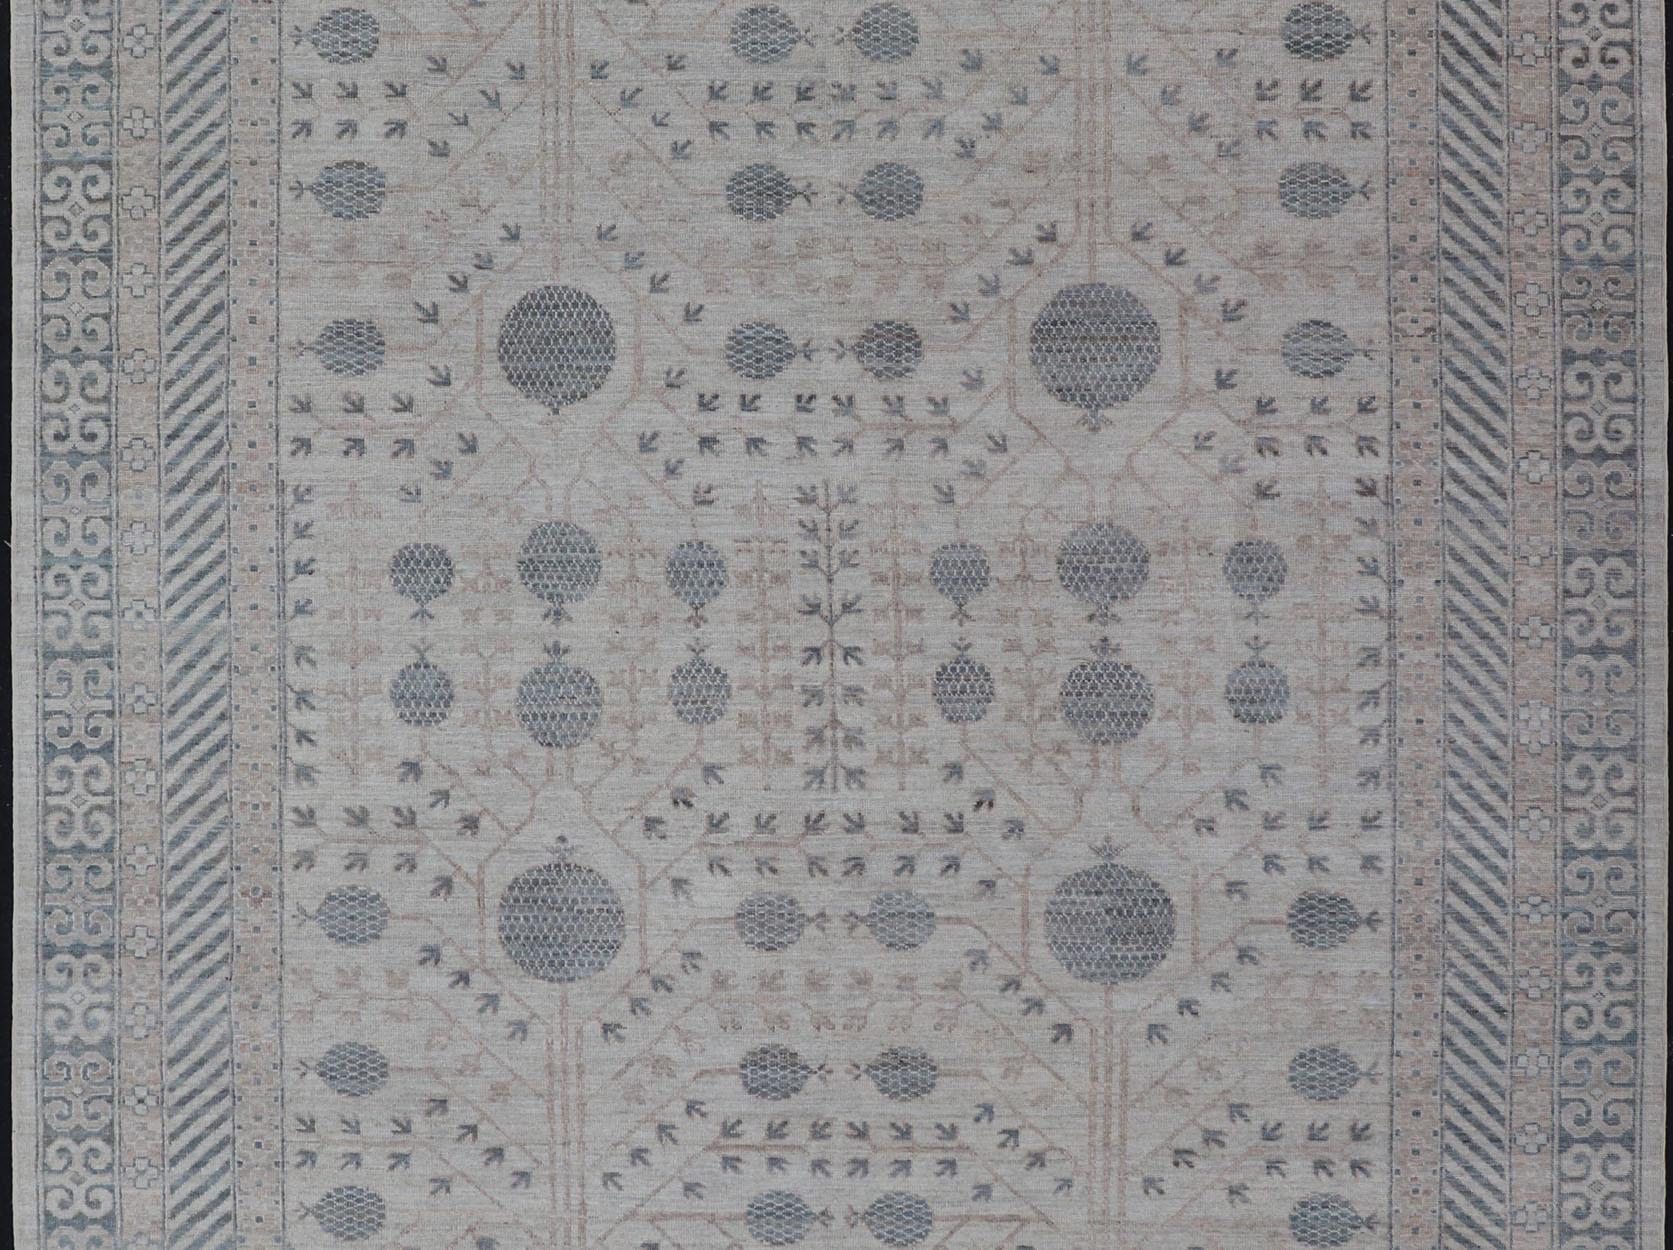 Modern Tribal Khotan Rug in Shades of Cream, Tan, and Light Teal For Sale 2